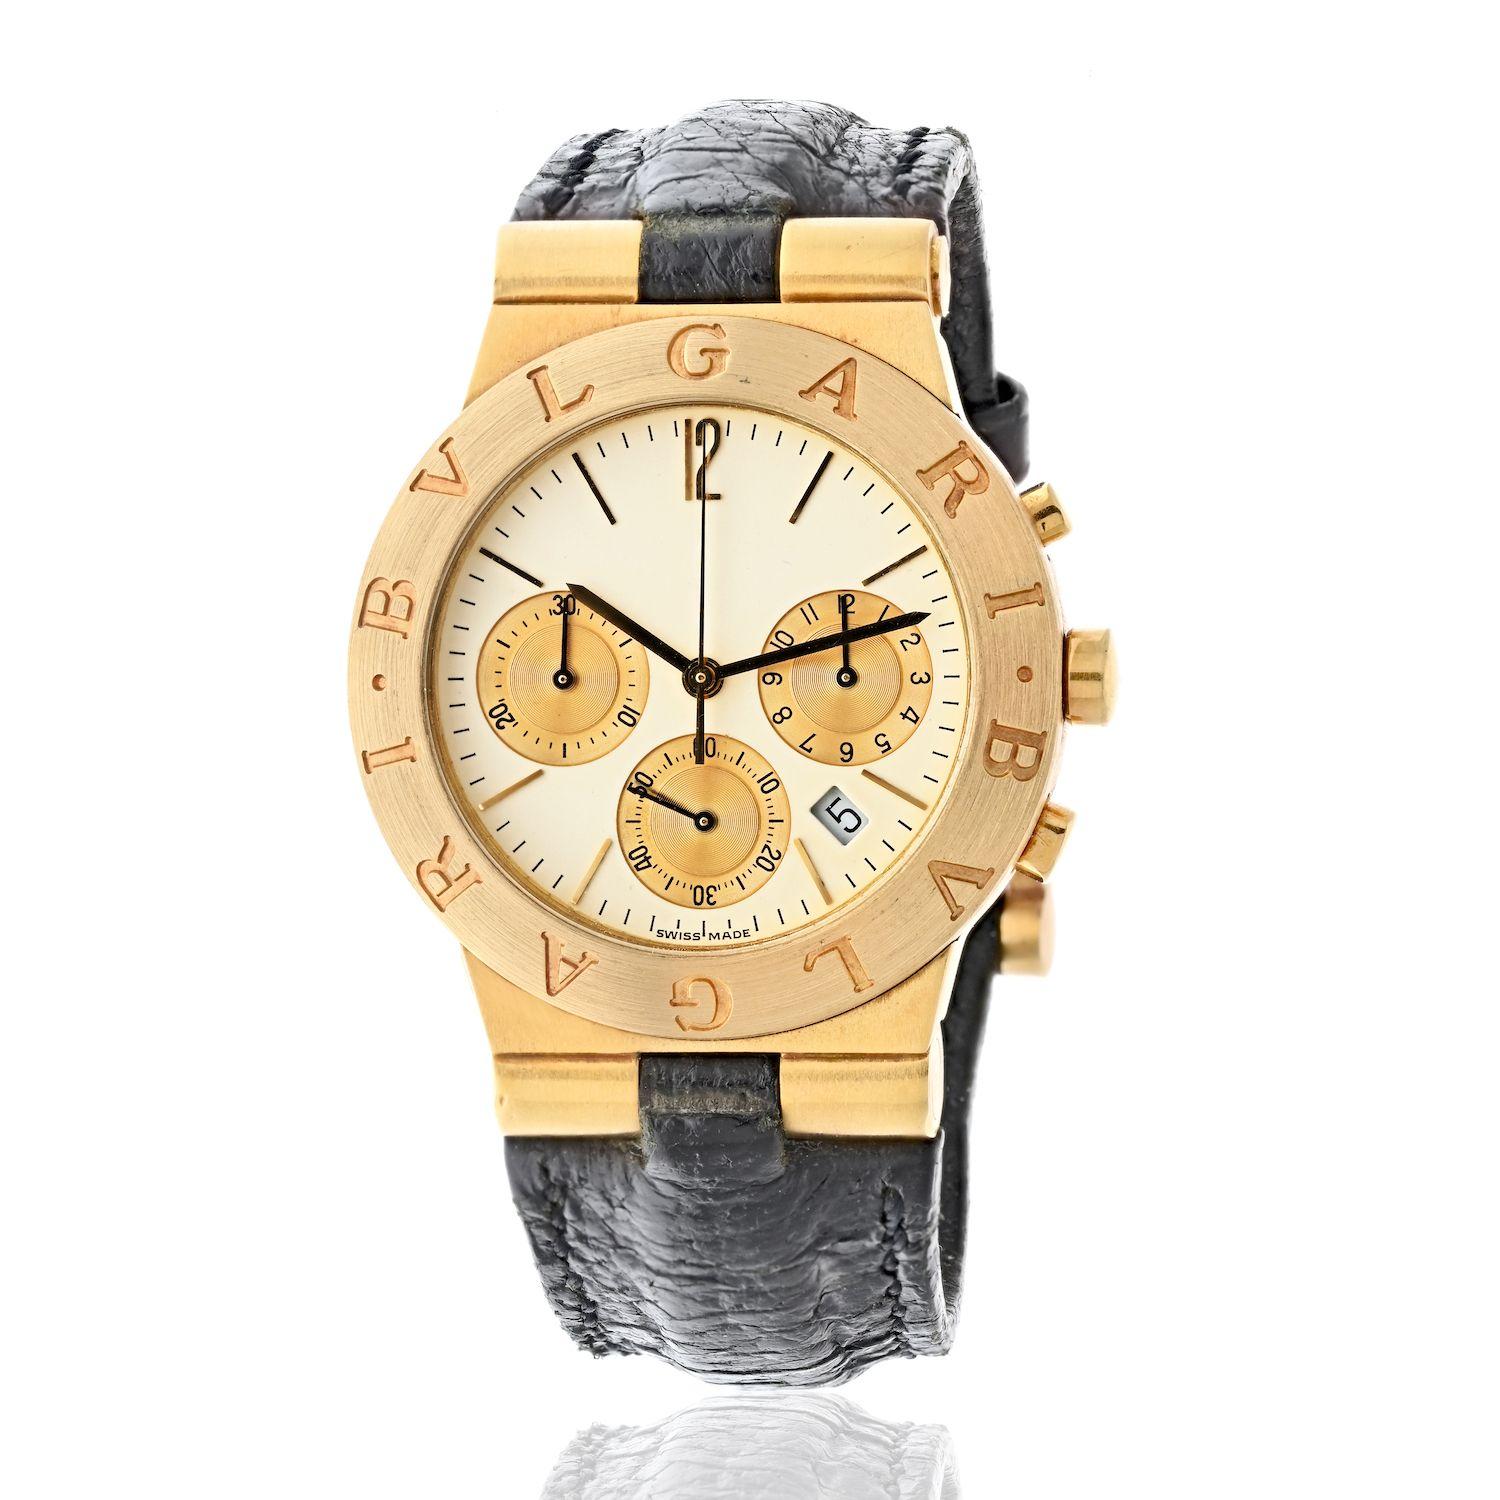 Bulgari Diagono Chronograph 35mm 18k Yellow Gold Unisex Watch. 
A neutral design with classic features makes this Bvlgari watch a perfect unisex wrist watch. Medium size 35mm face is suitable both for men and women, and classic colors like black,